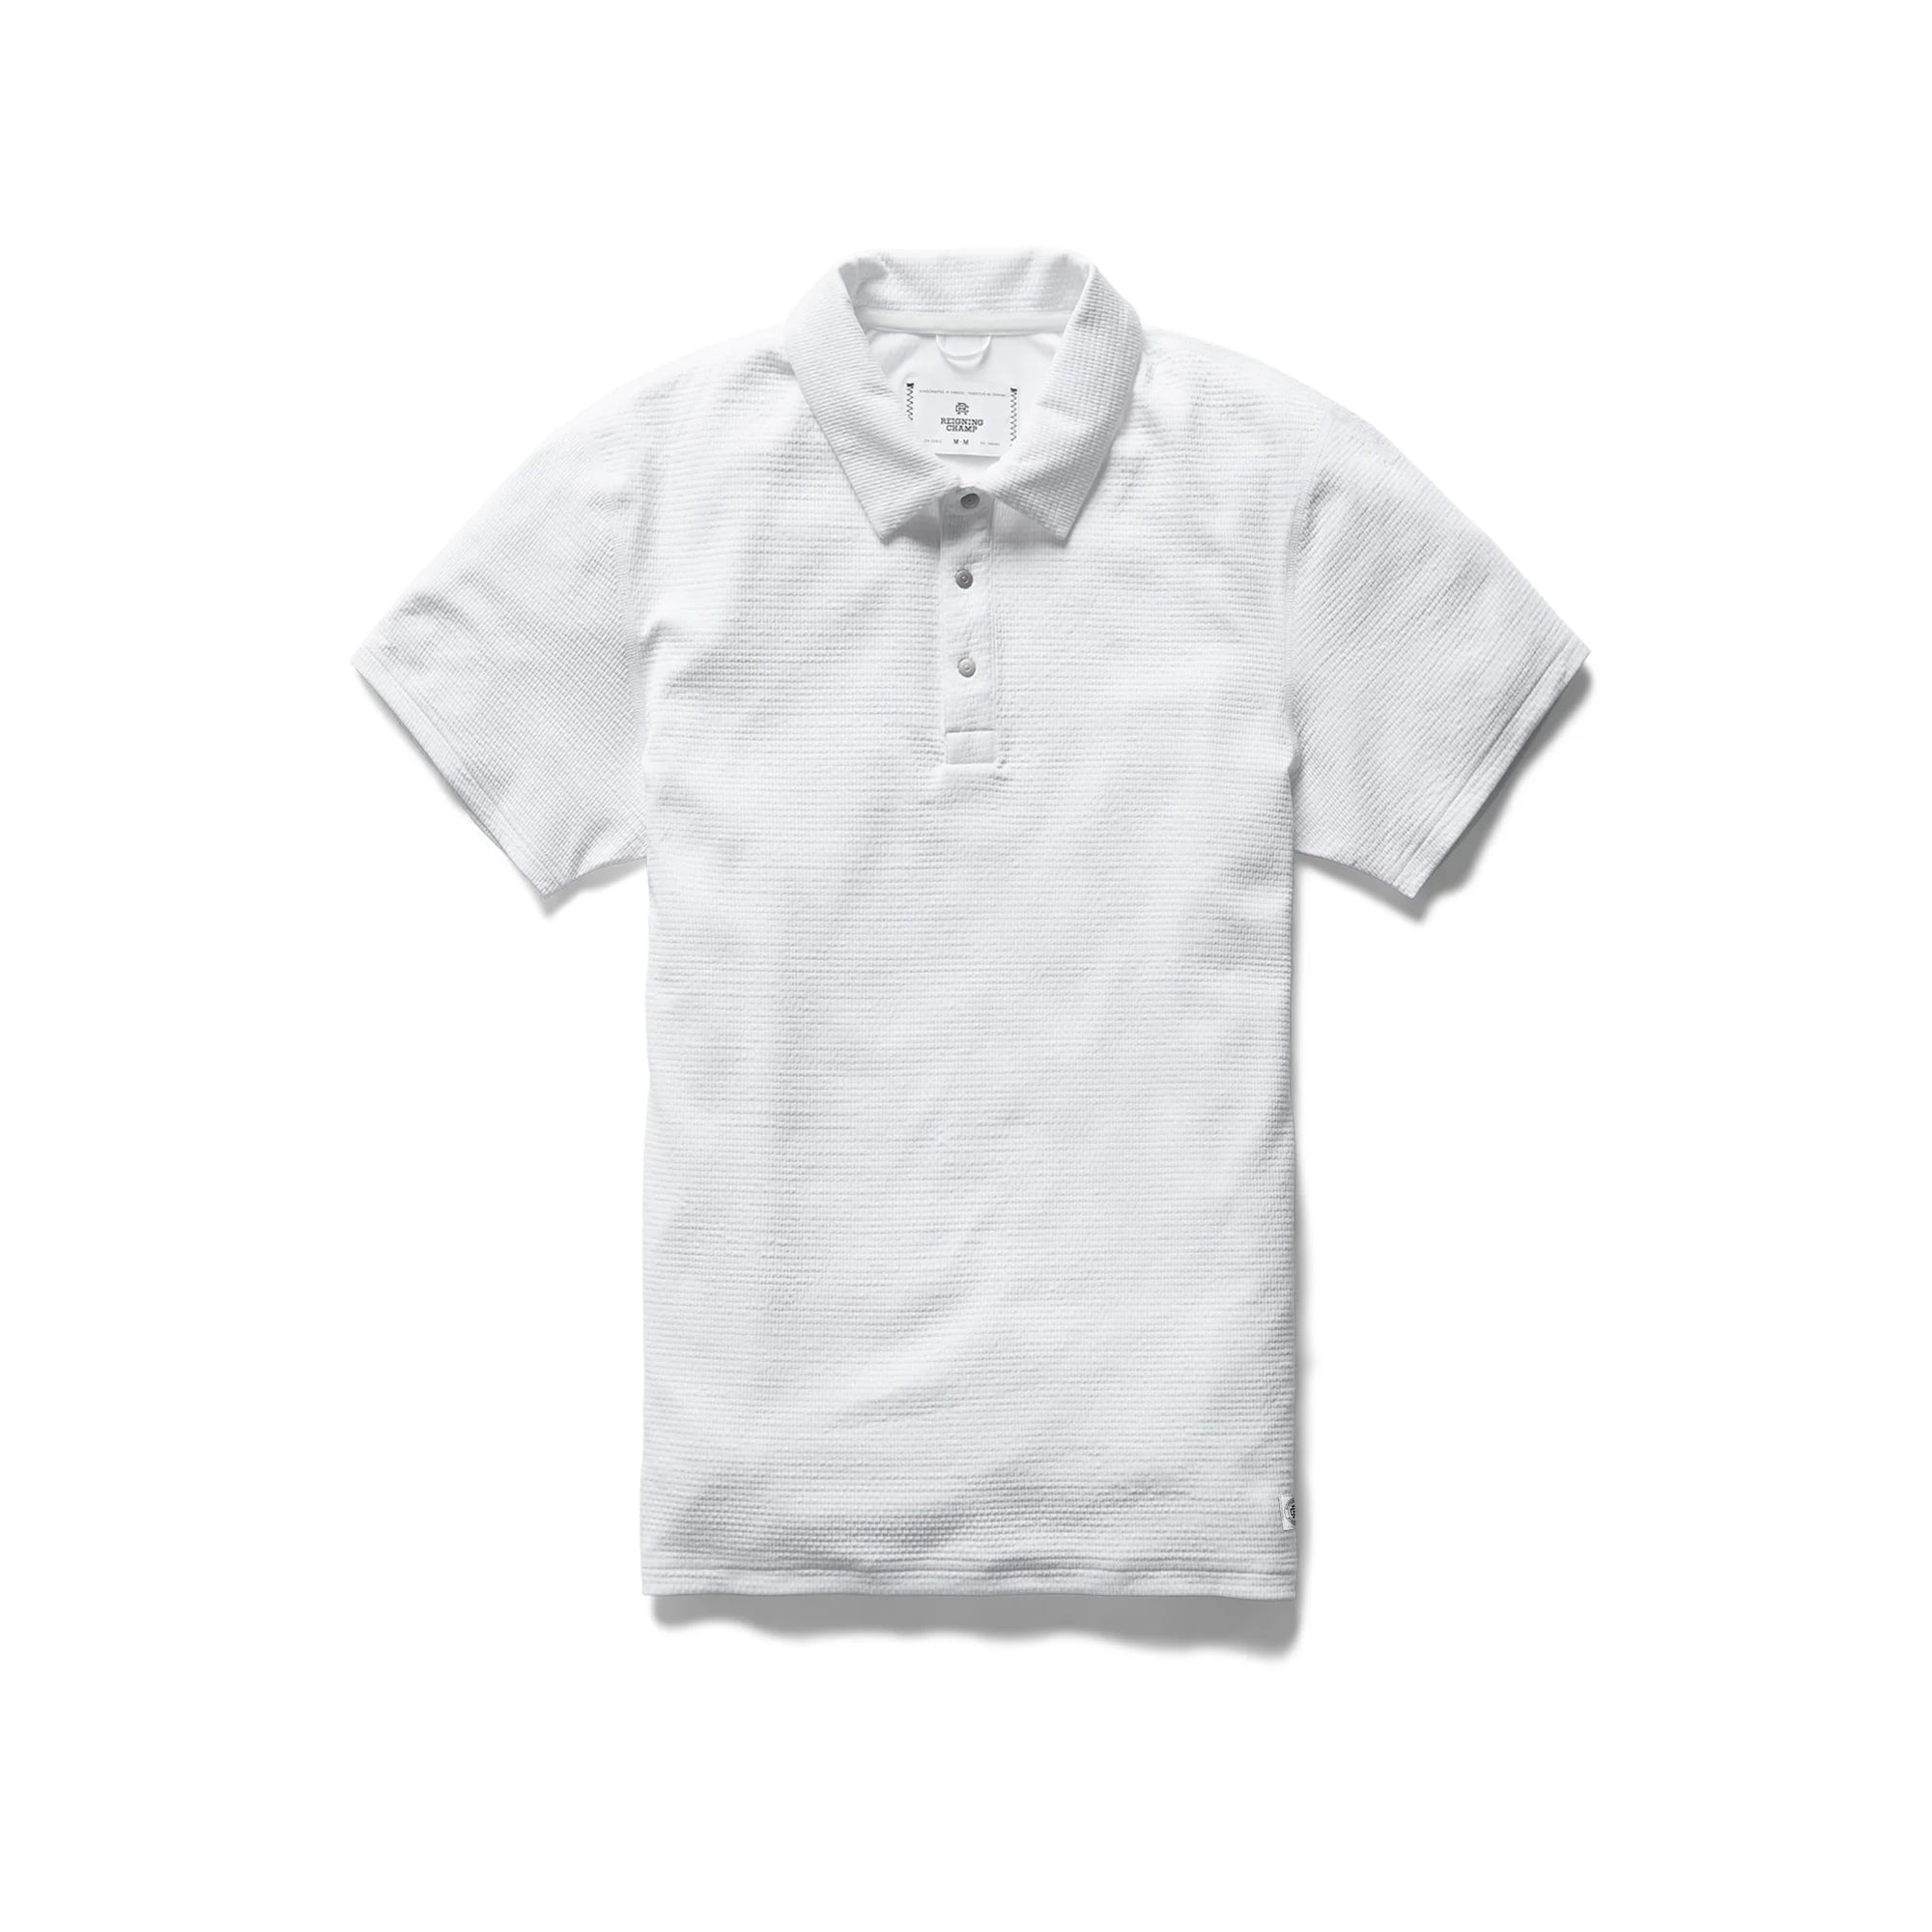 Reigning Champ Solotex Mesh Polo in White